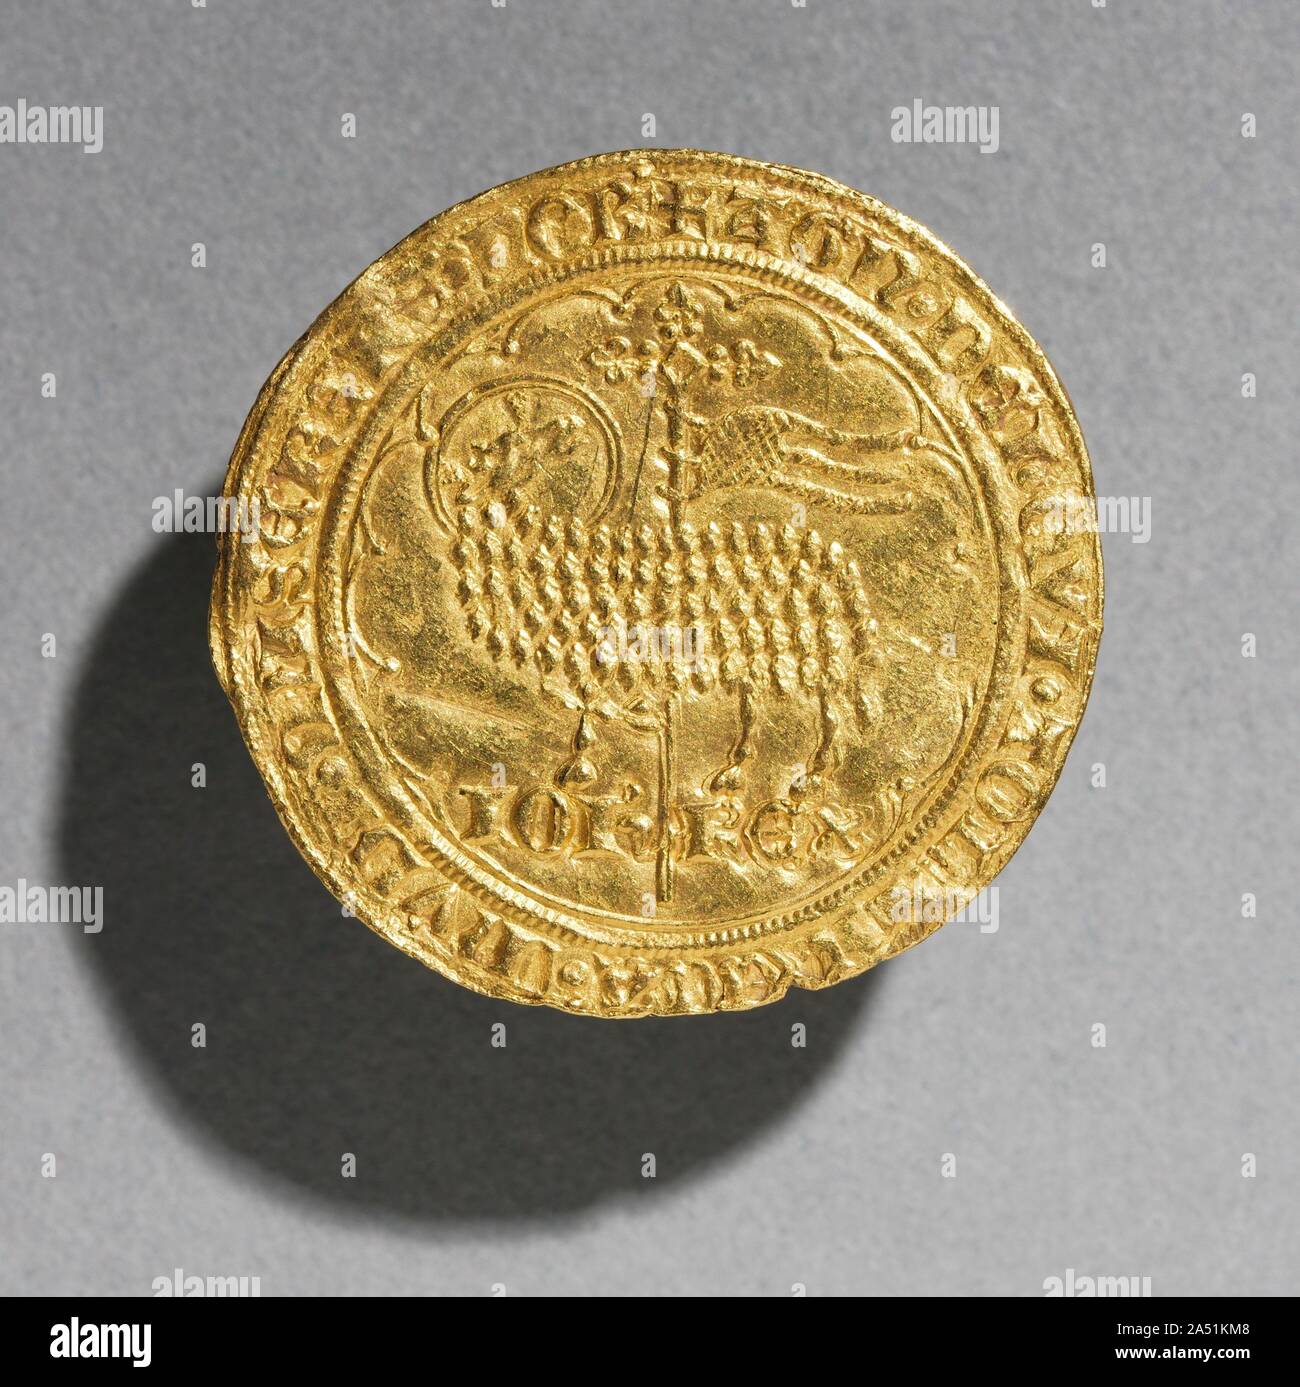 Mouton dOr of King Jean le Bon of France, 1350-1364 (obverse), 1350-1364. Because this gold coin represents the Paschal Lamb, a symbol of Christ, on one of its faces, it is known as a &quot;Golden Sheep&quot;--Mouton dOr in French. Stock Photo